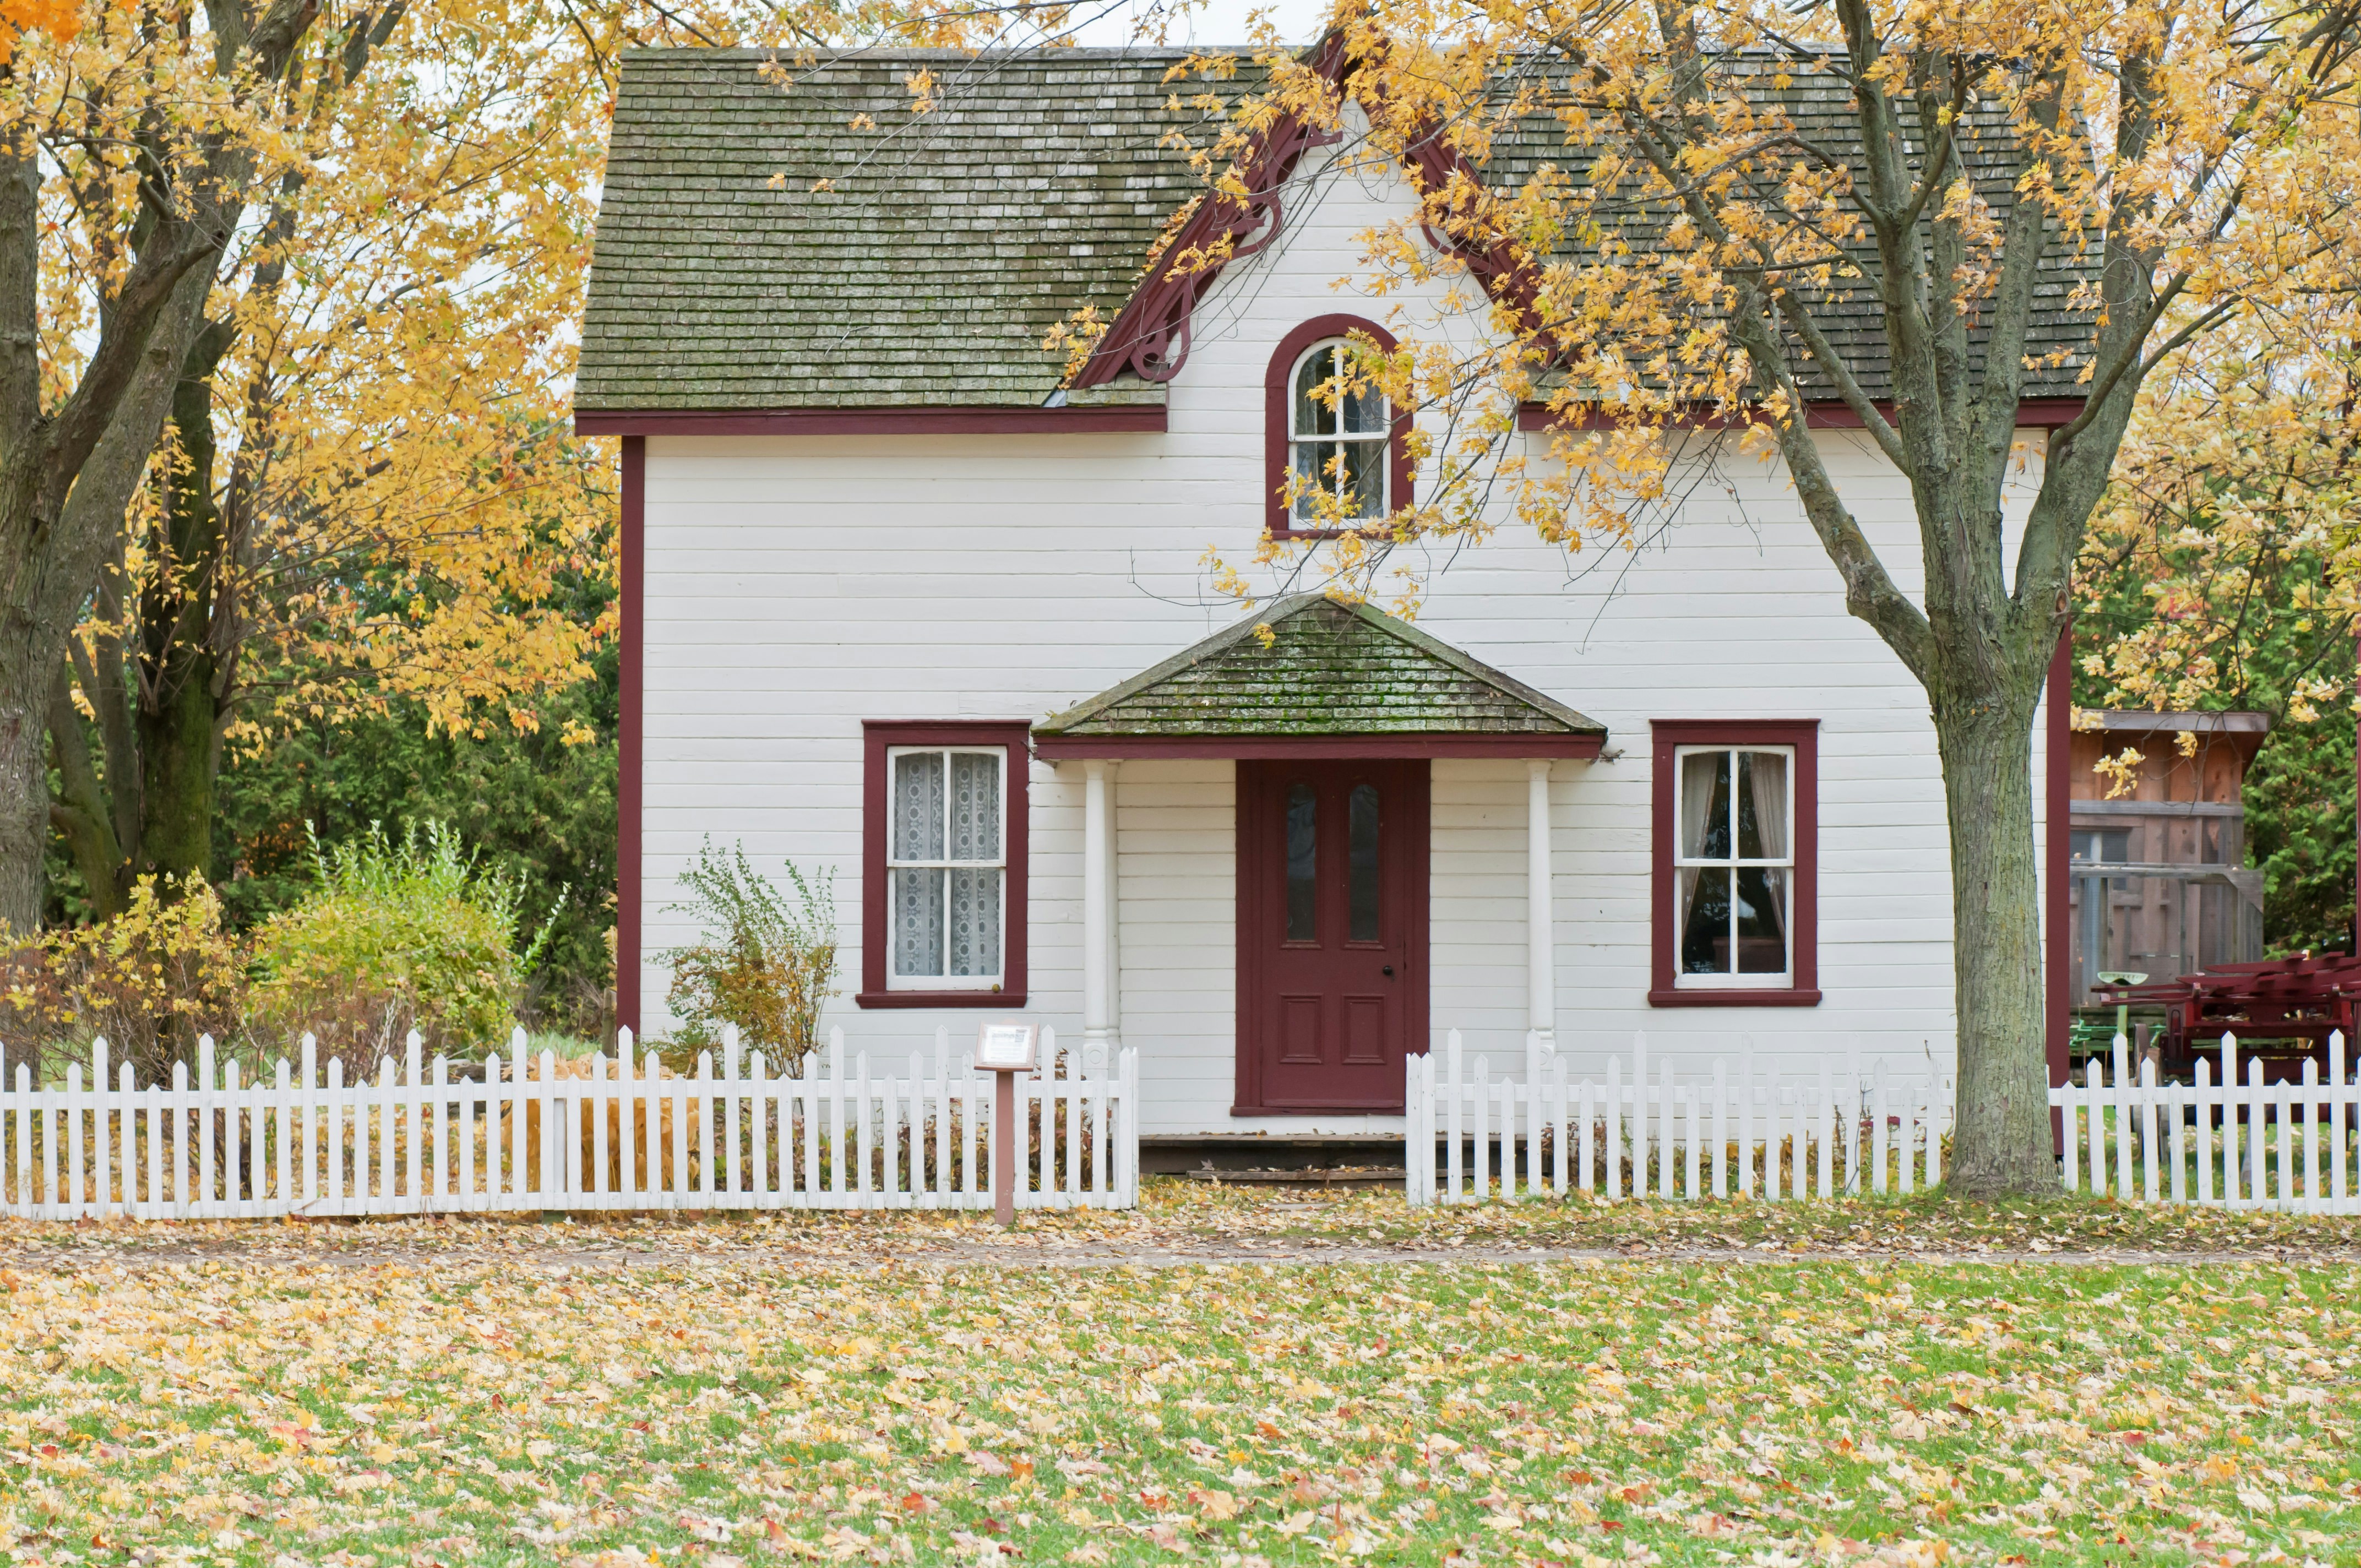 &quot;Small house on an autumn\u2019s day&quot;